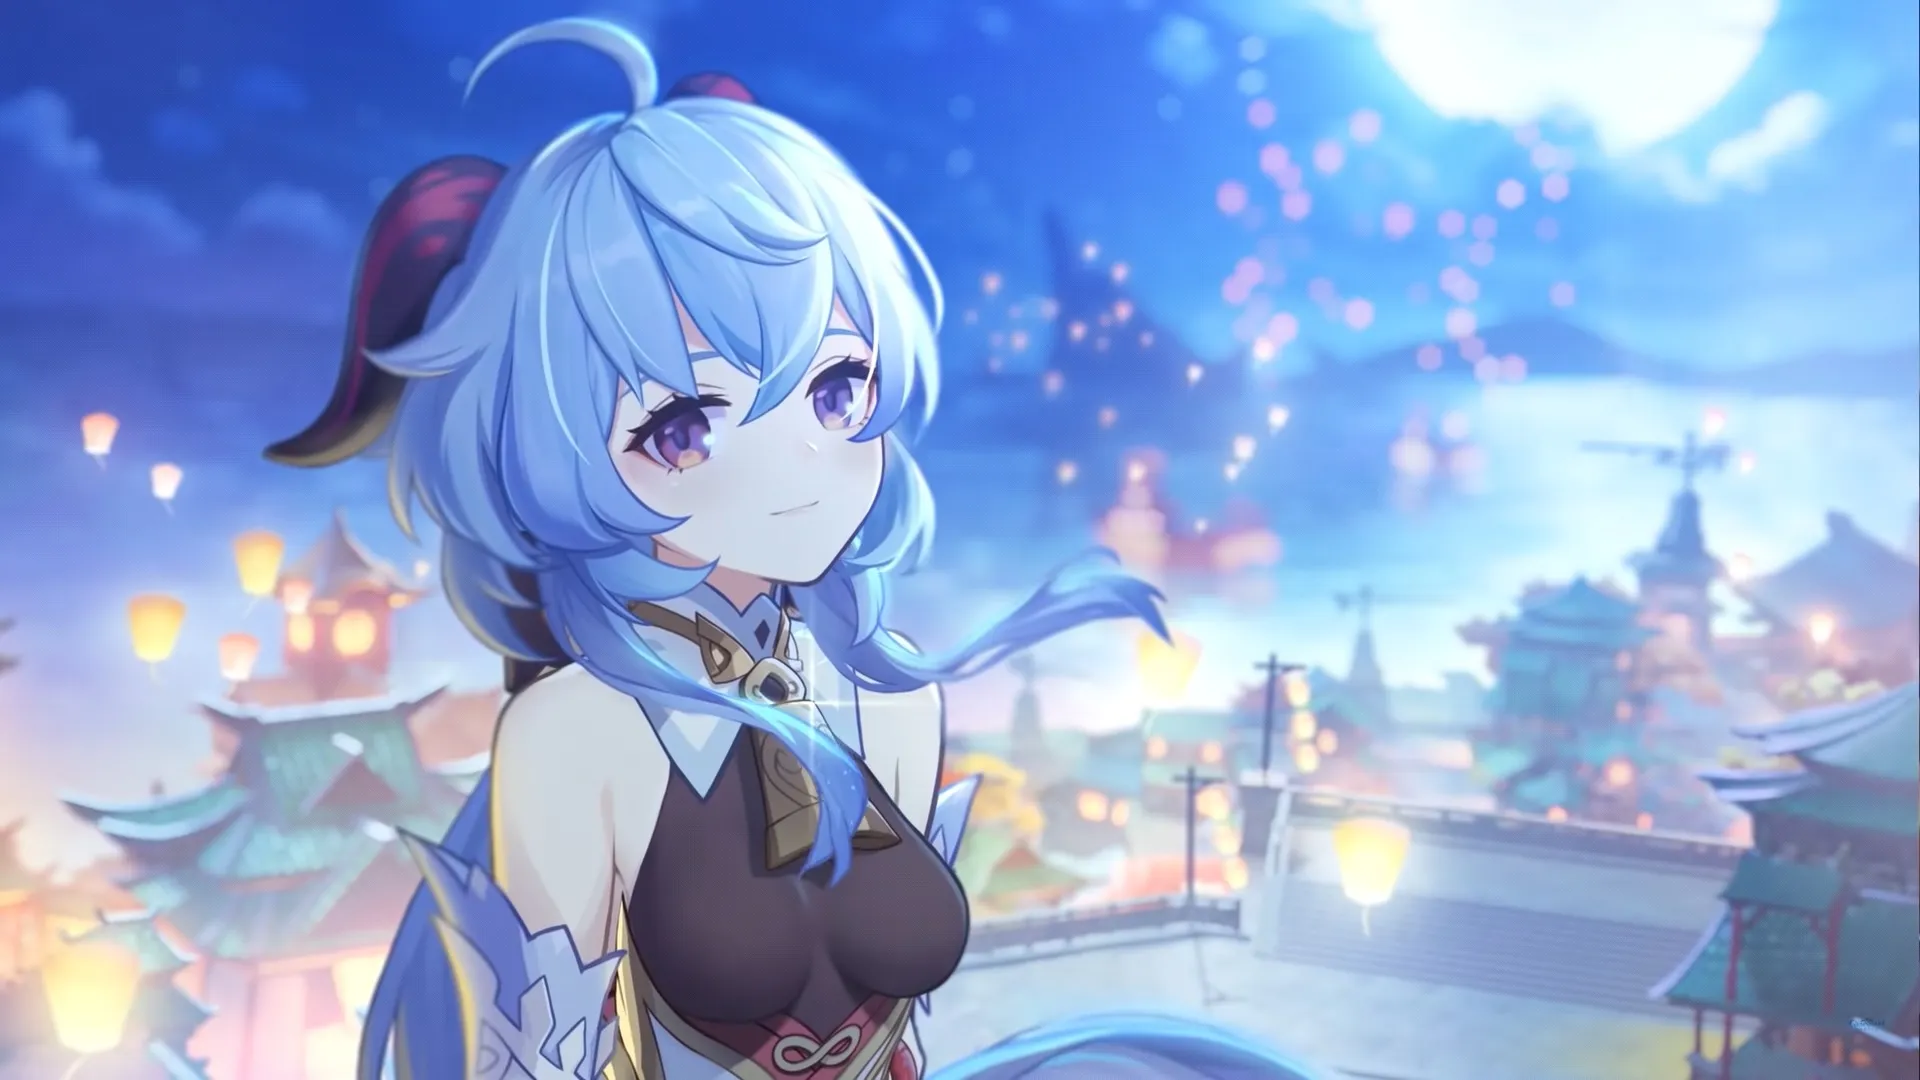 Ganyu from Genshin Impact wants you to hang out with her in a new trailer